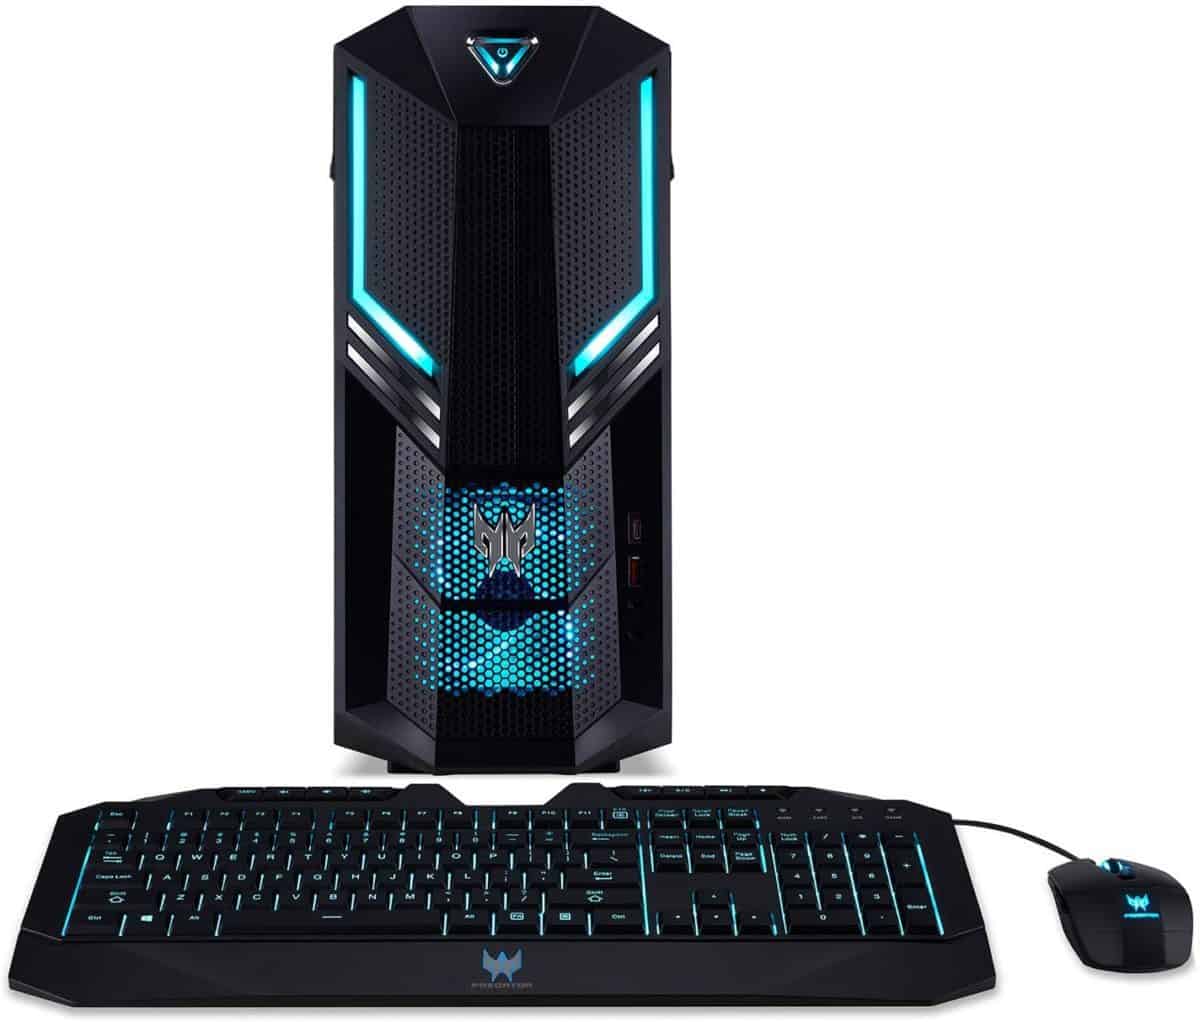 Curved Best Prebuilt Gaming Pcs Under 2000 with RGB